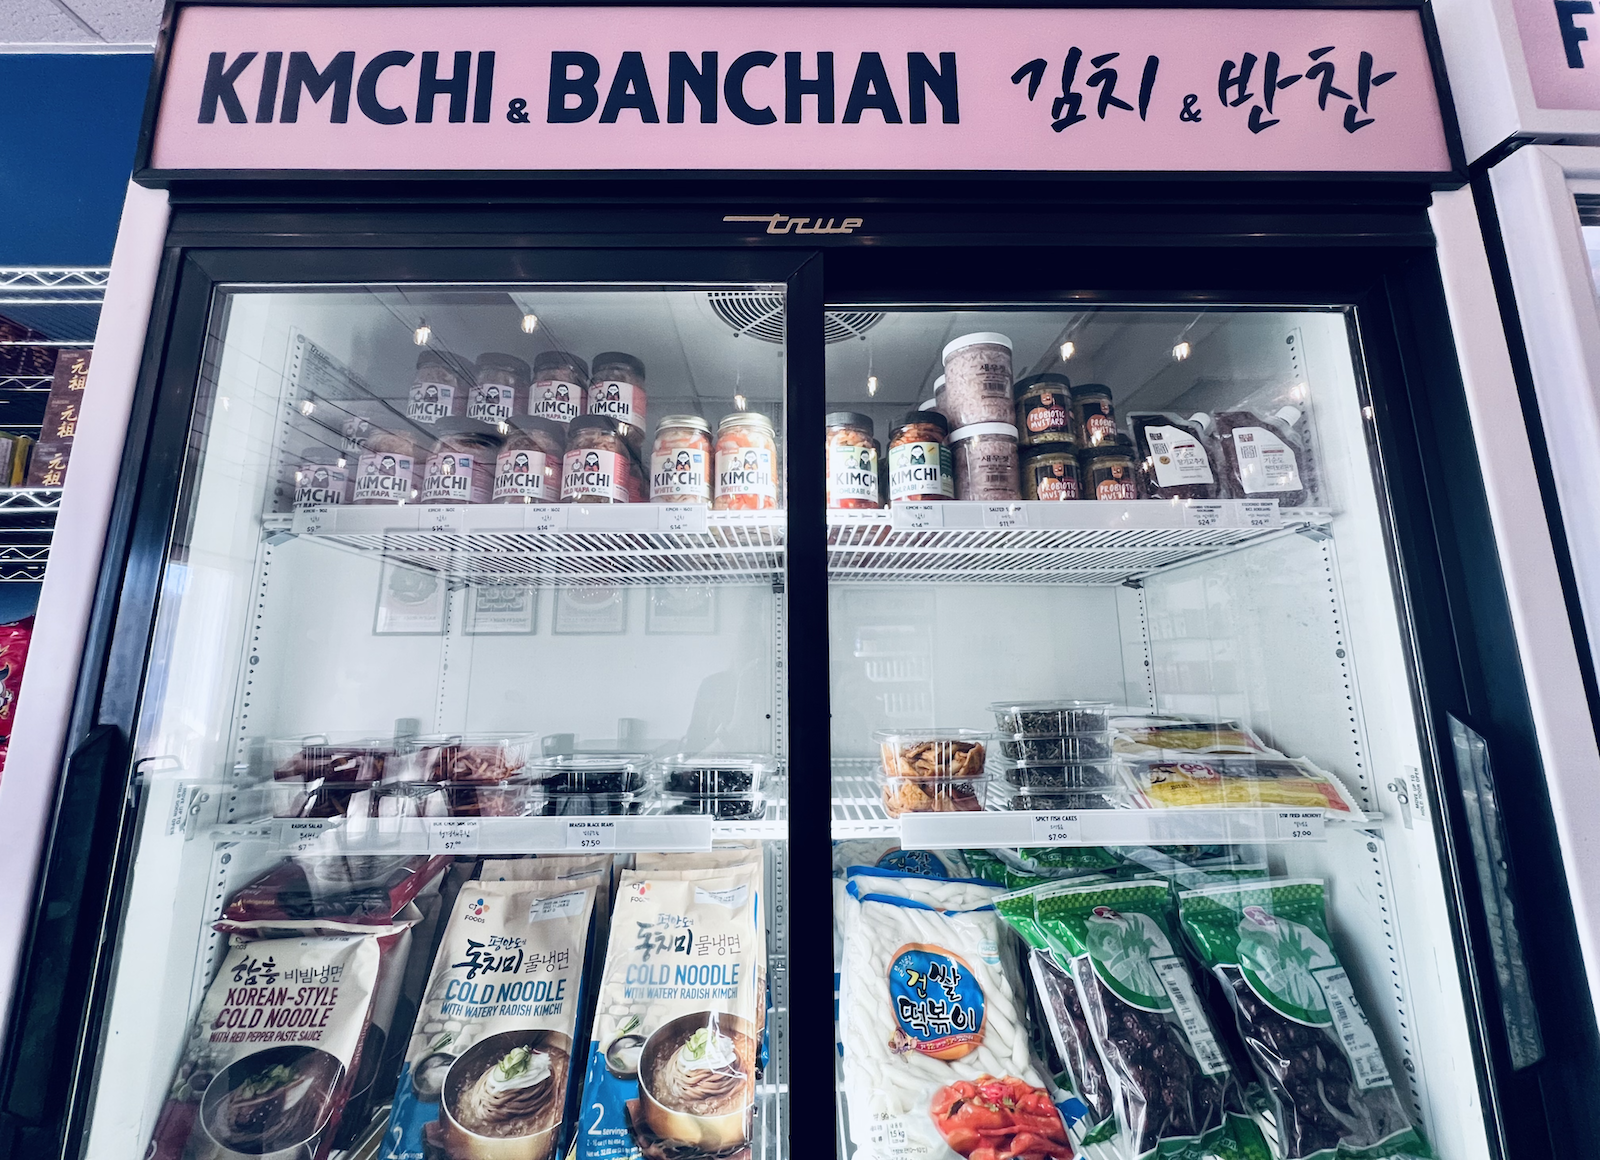 In addition to offering tasty, sustainable, locally-sourced treats, the True Kimchi brand is all about sharing Korean culture through the vehicle of food and expanding the city's food diversity.